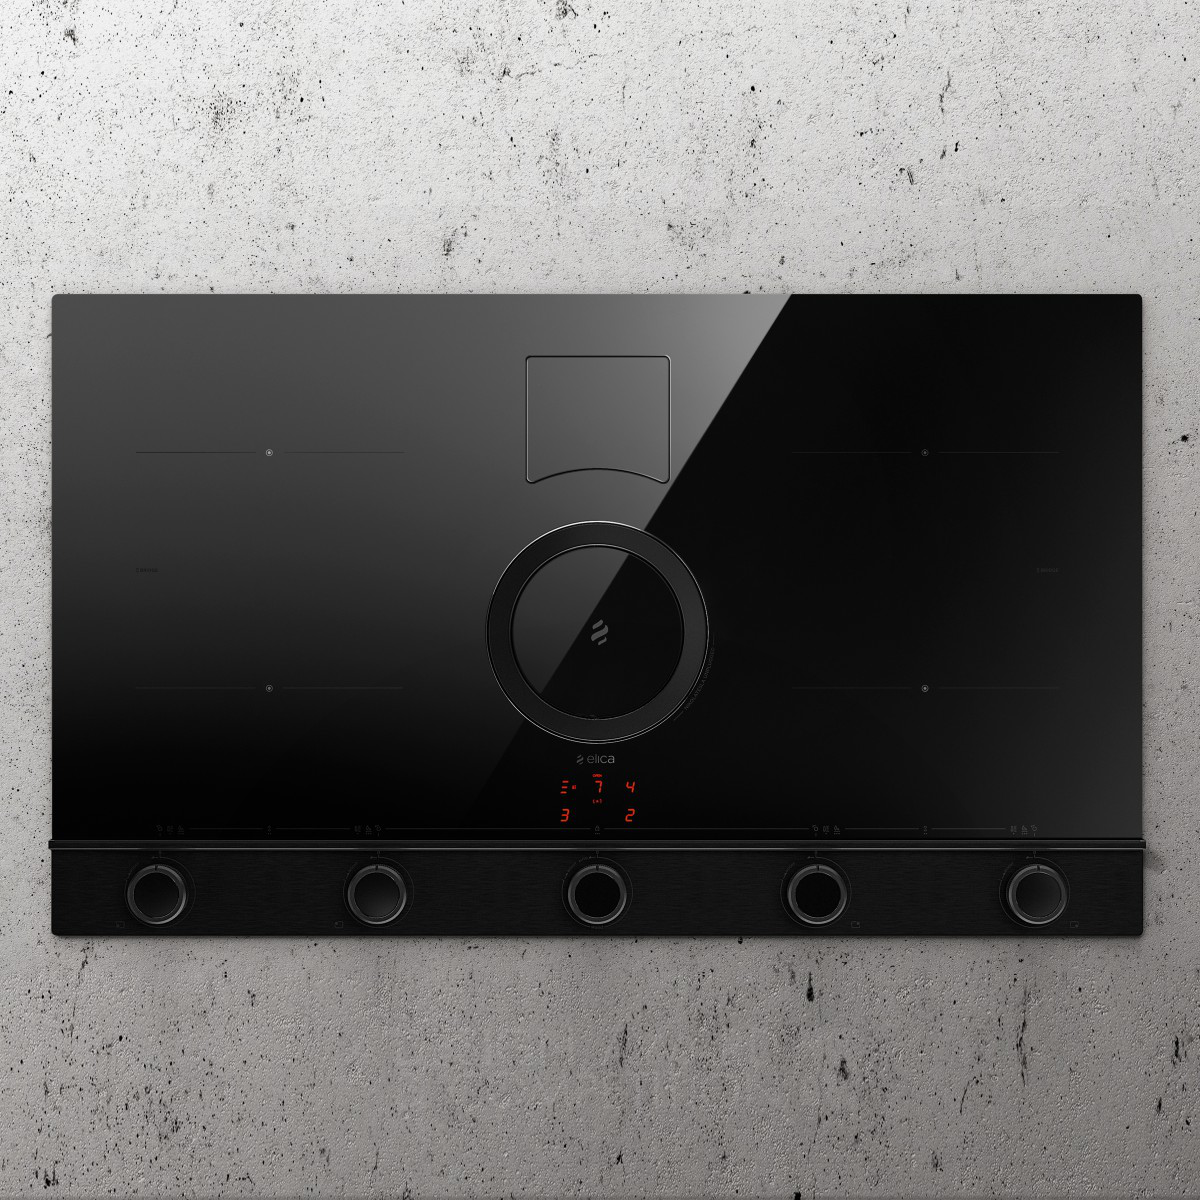 Good Extractor Induction Hob With Knobs Design